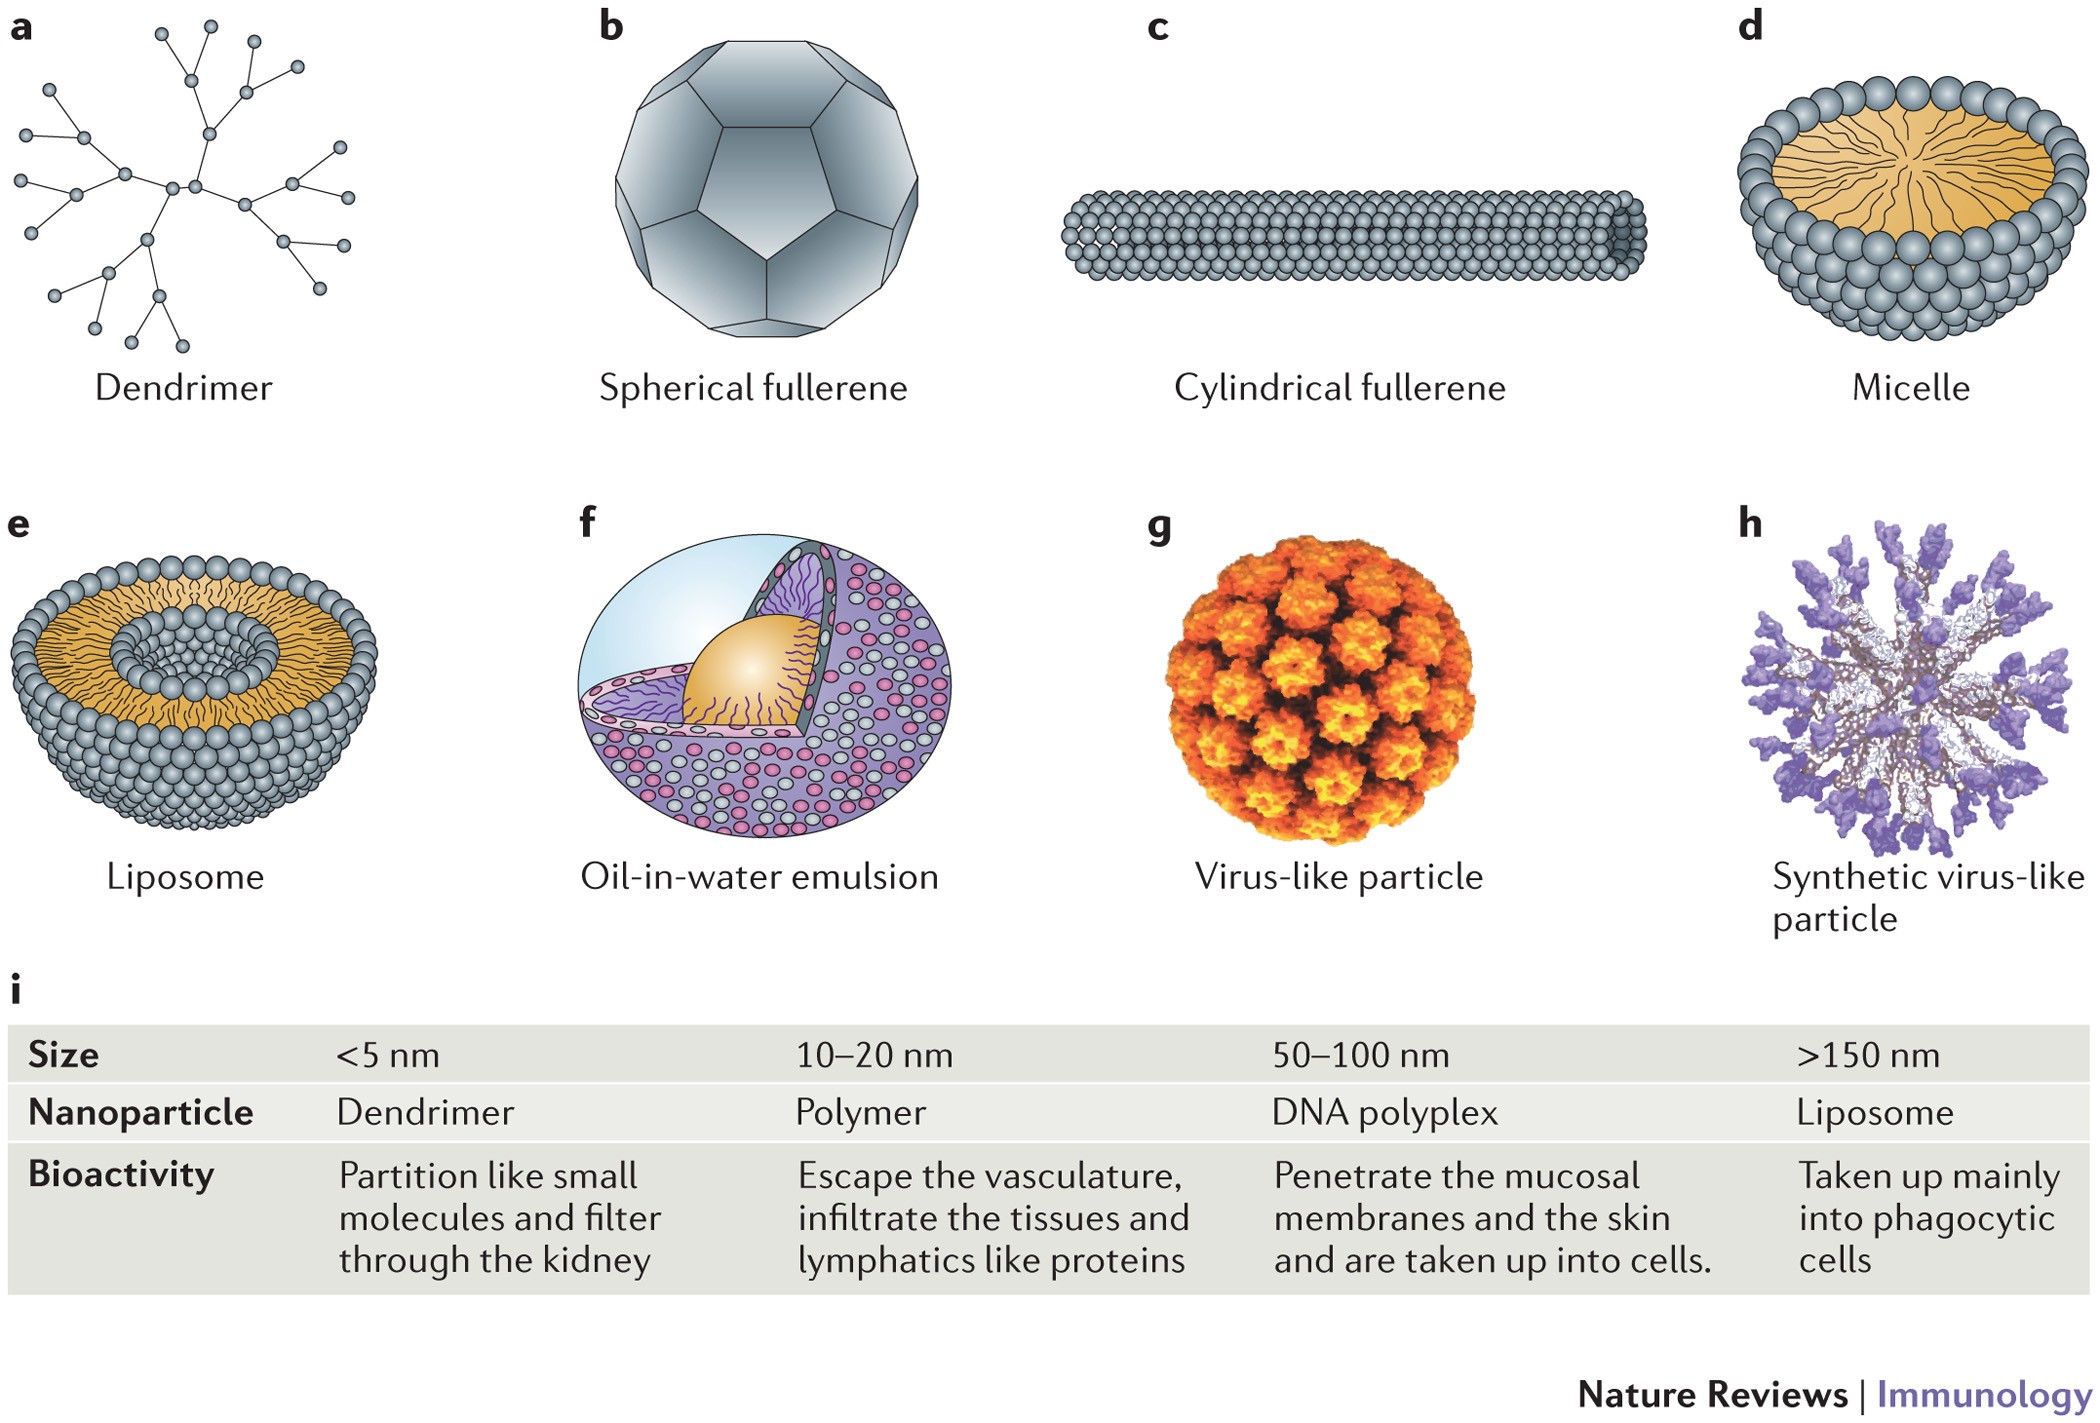 Applications of nanotechnology for immunology | Nature Reviews Immunology